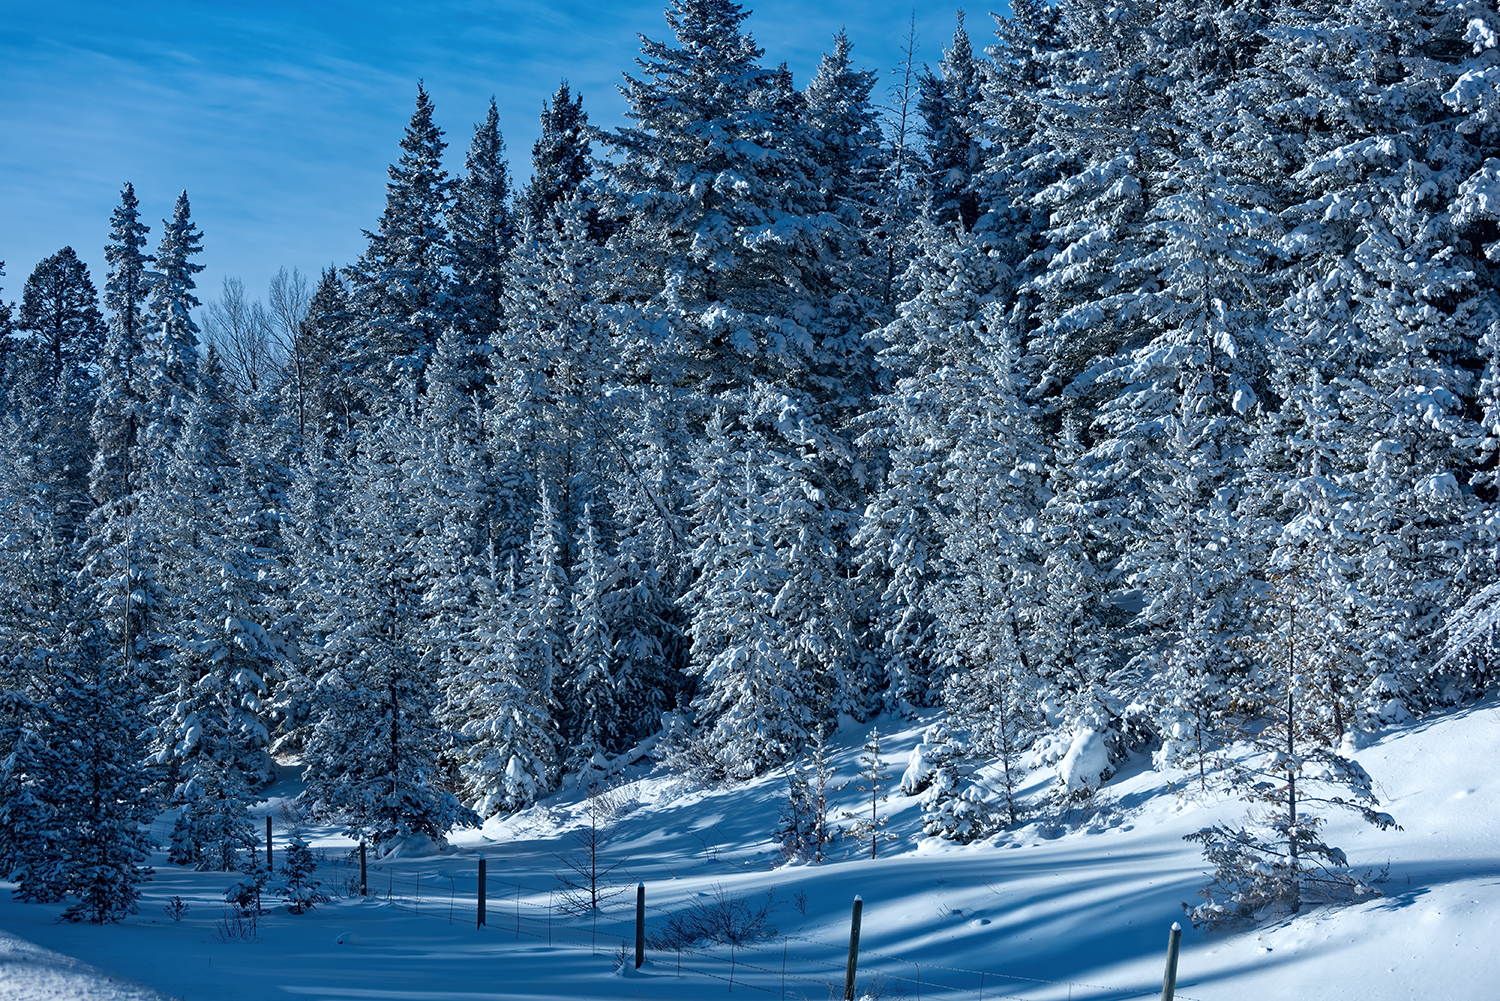 Kamloops Landscape snow-covered trees and forest with wooden fence